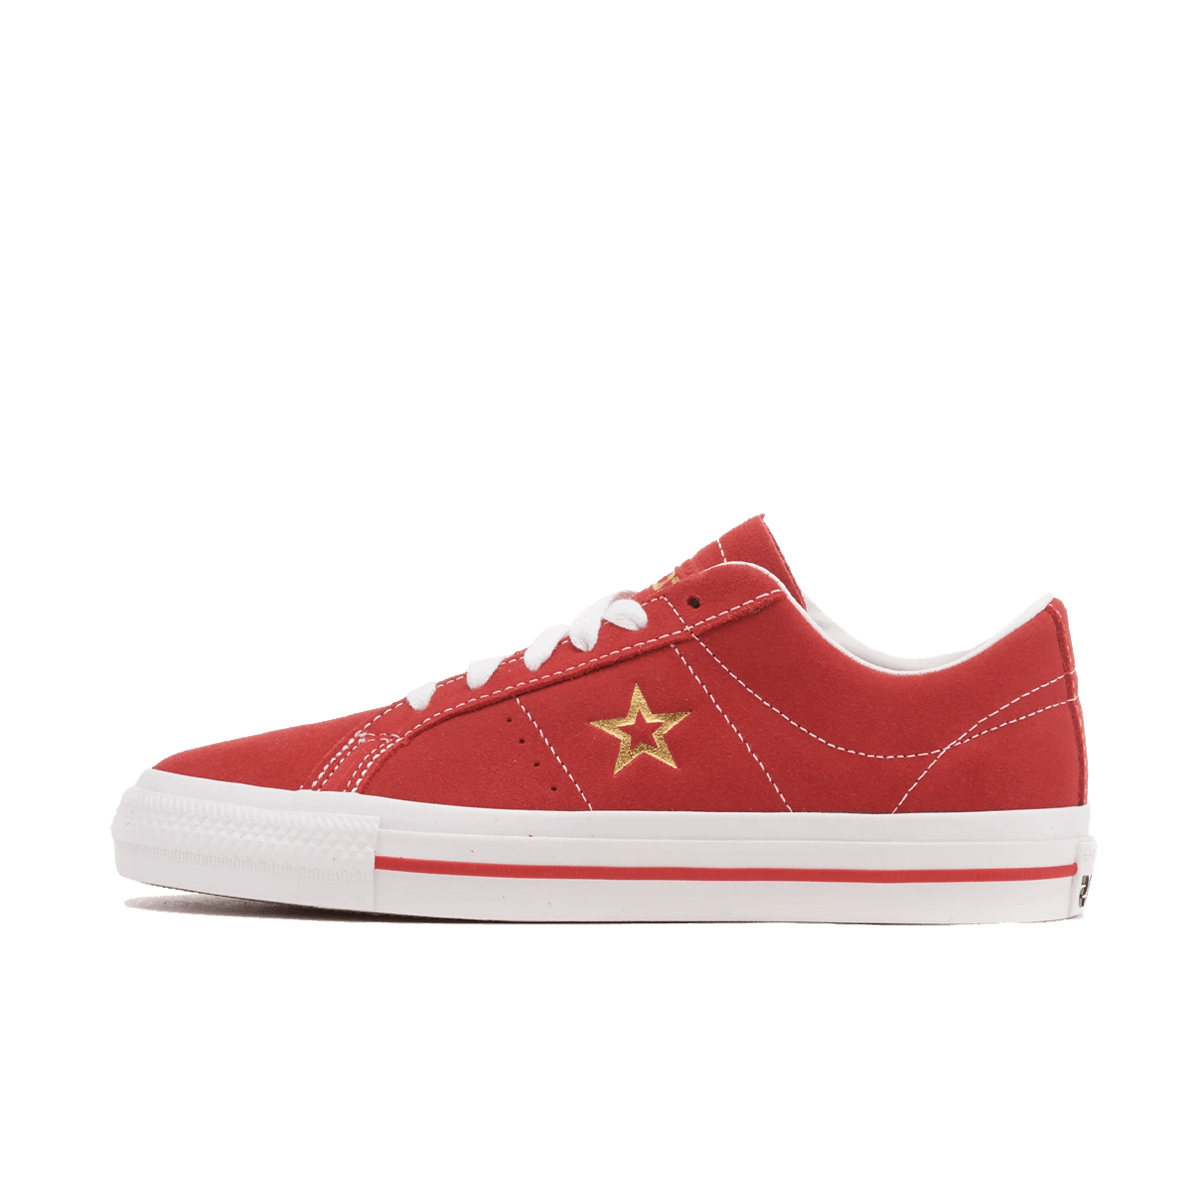 Converse One Star Pro Suede 'Red' A06646C